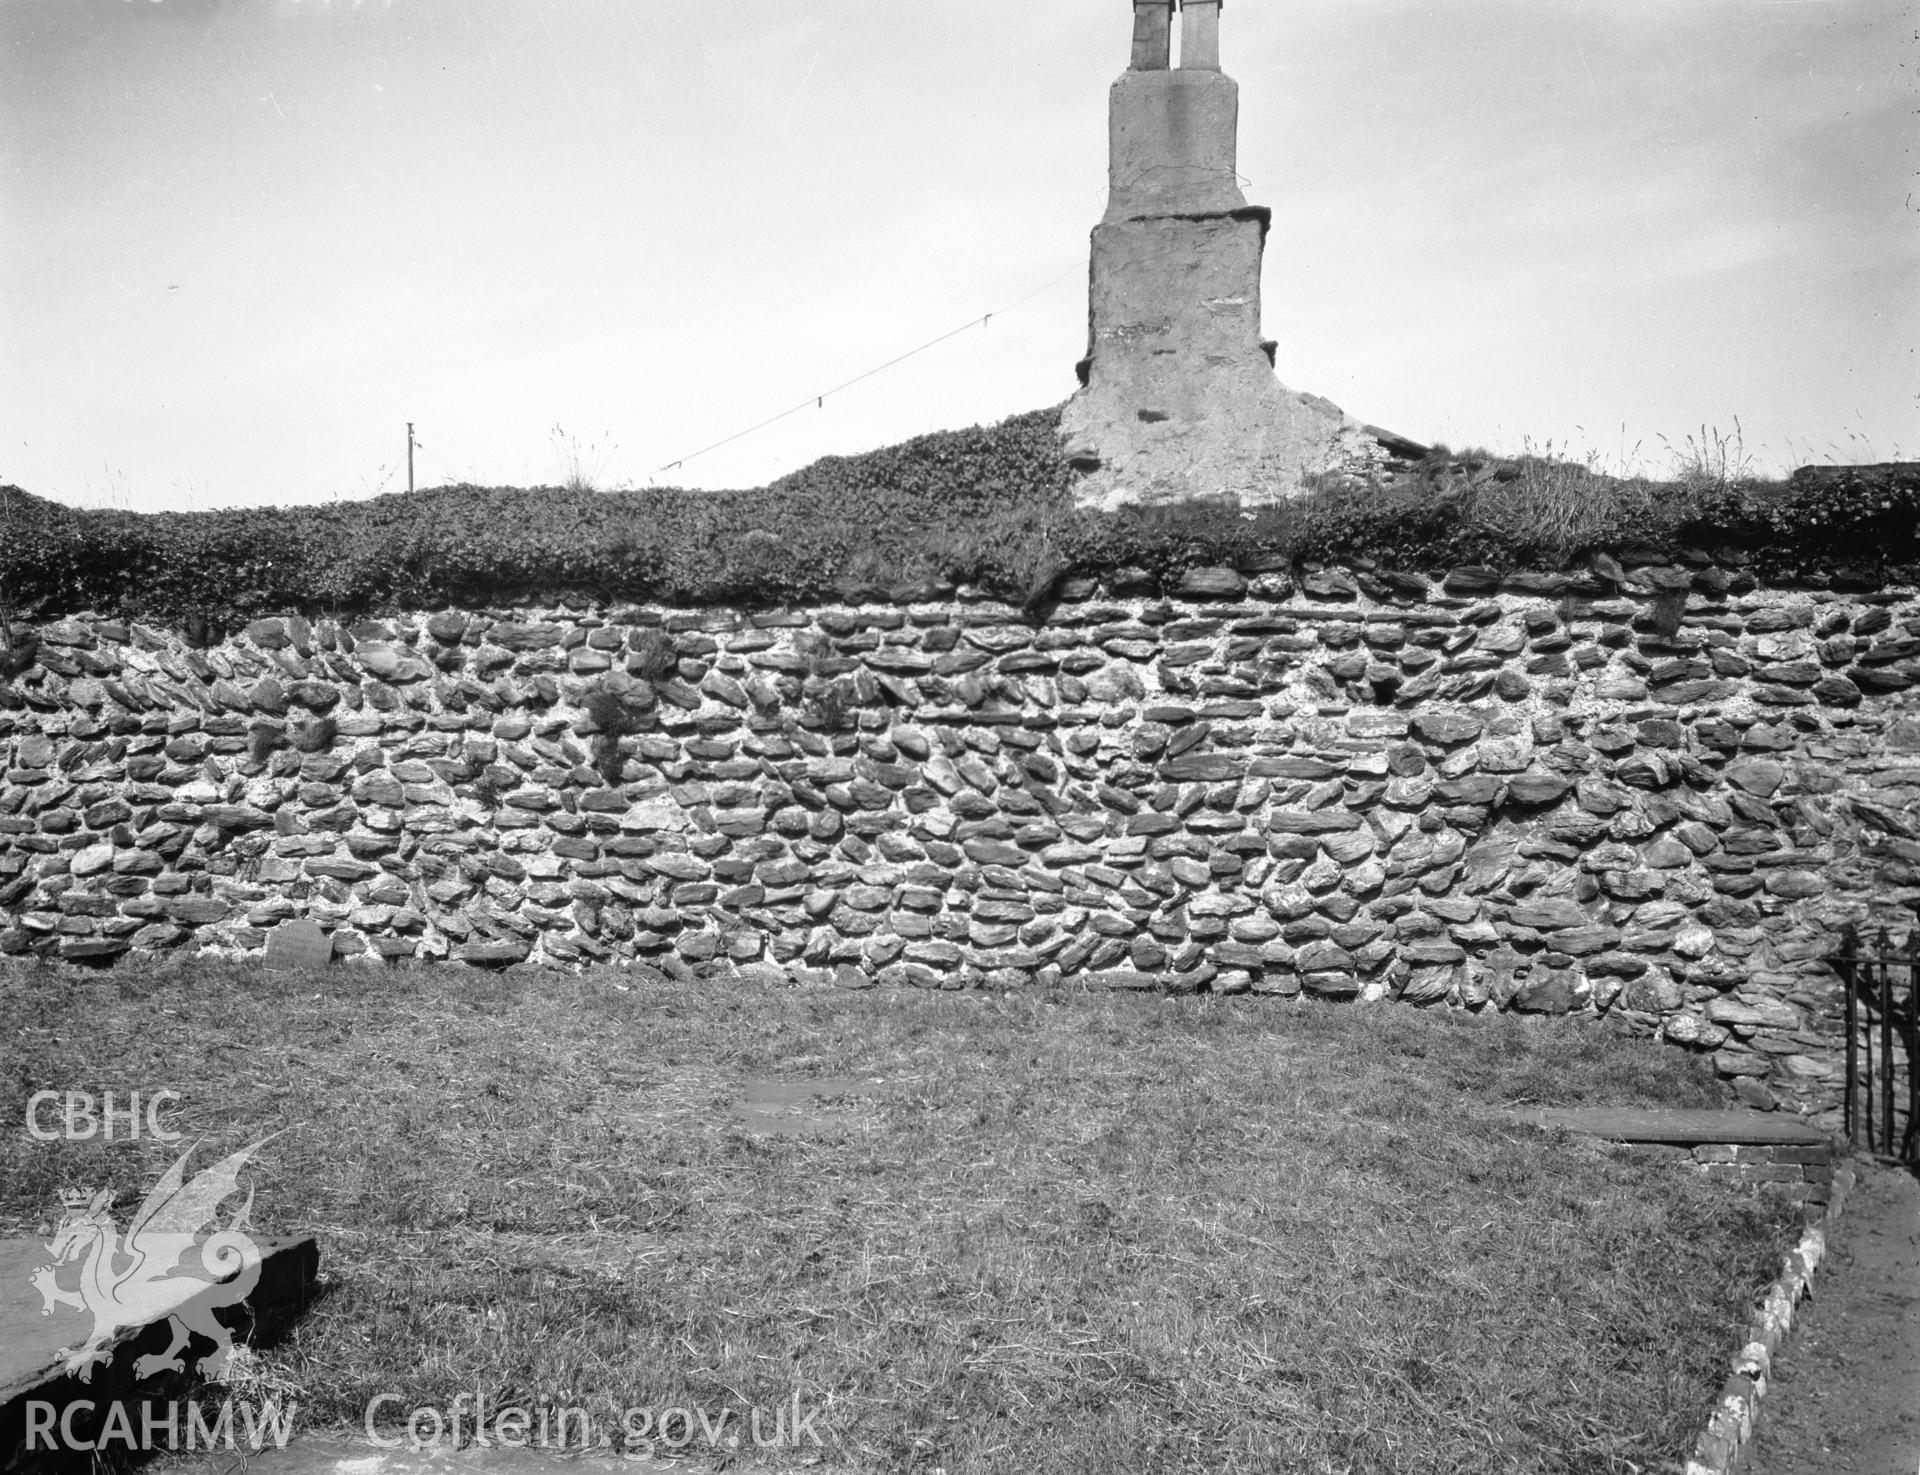 Digitised copy of a black and white negative showing Caer Gybi, produced by RCAHMW before 1960.